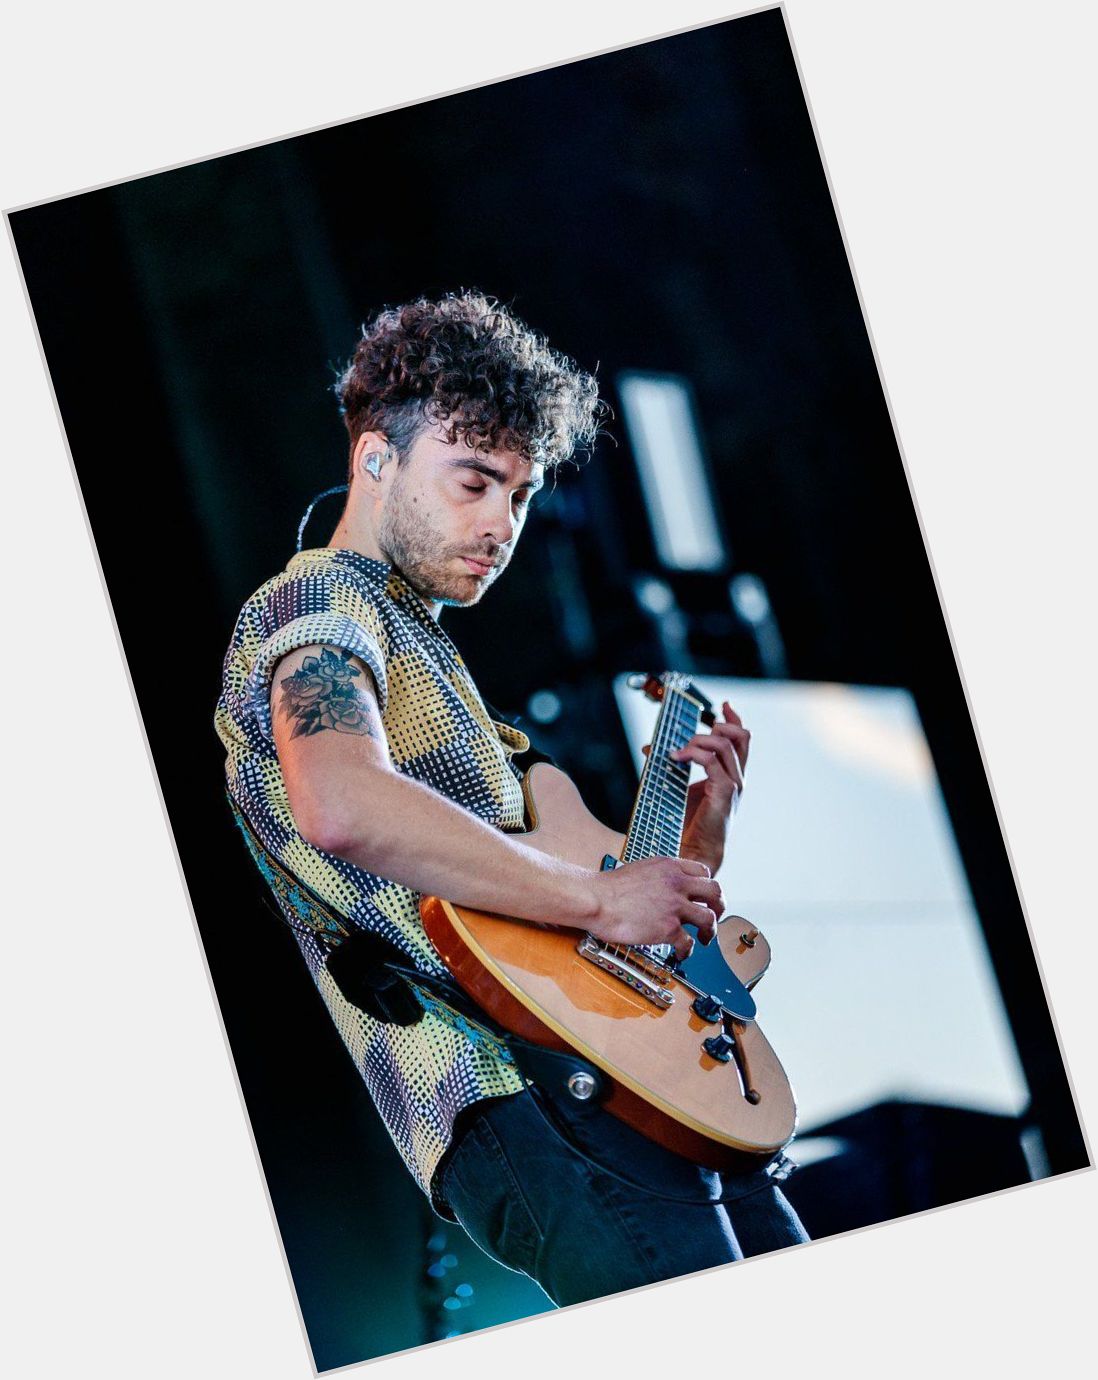 Please join us here at in wishing the one and only Taylor York a very Happy 31st Birthday today  